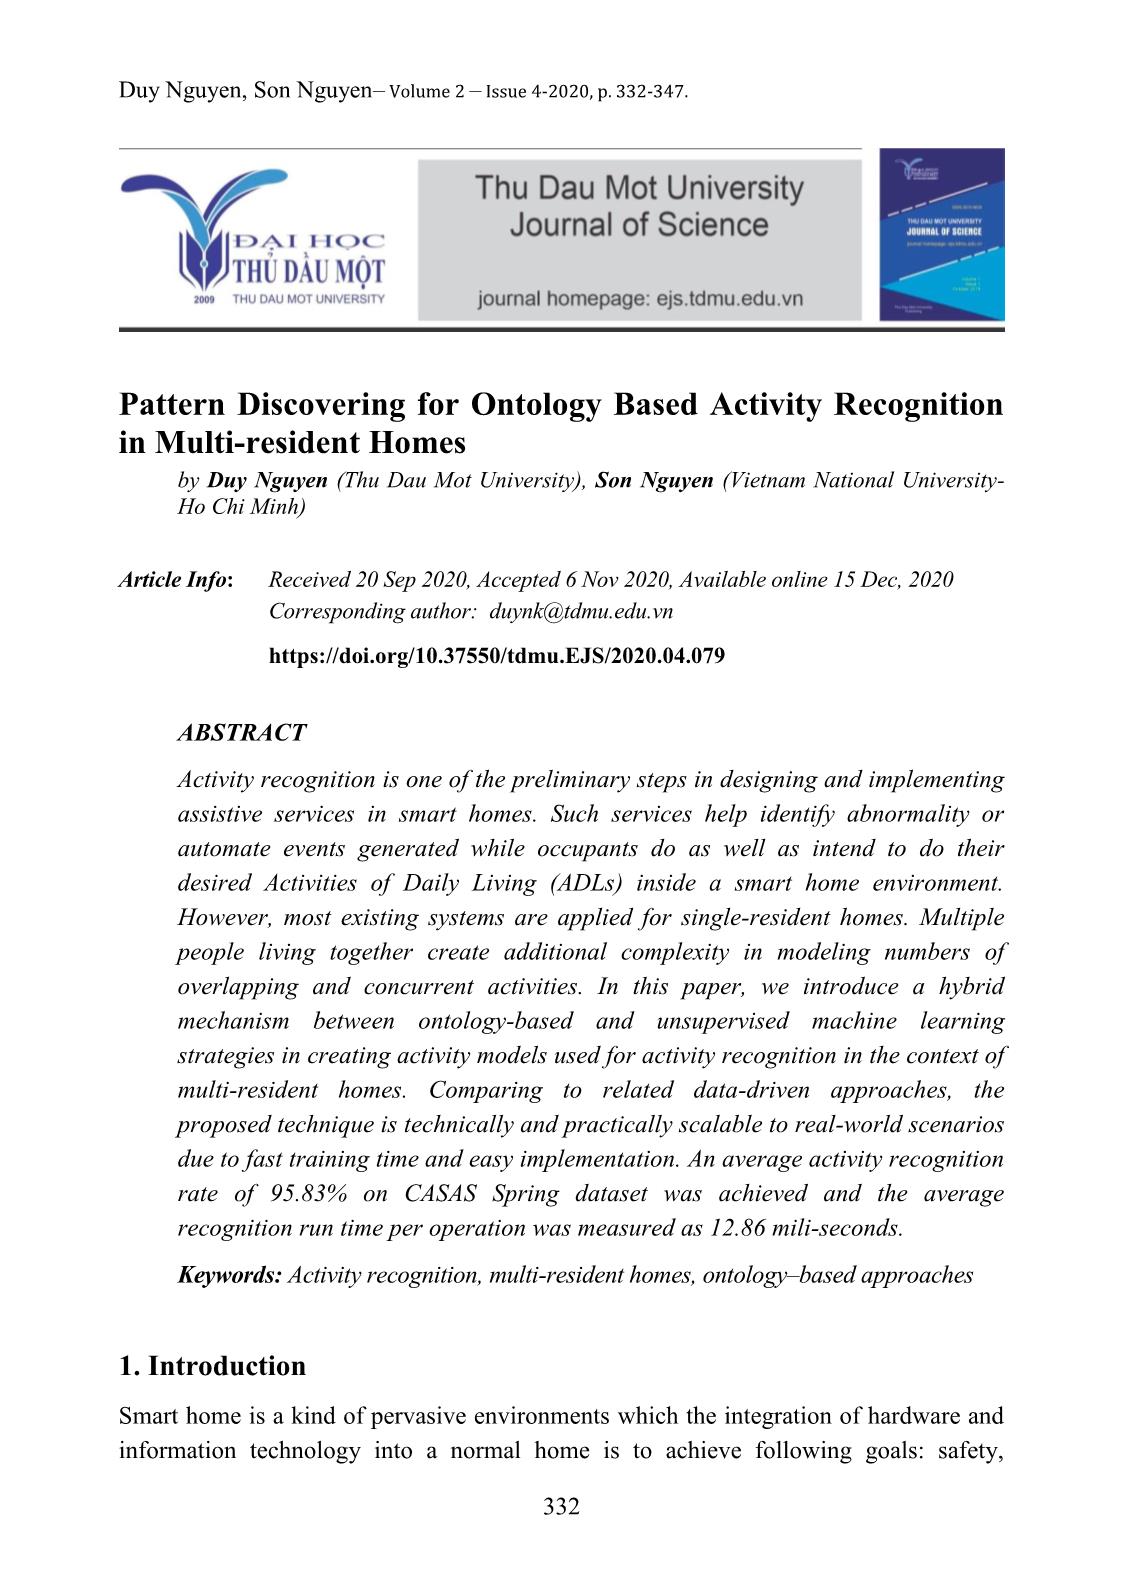 Pattern discovering for ontology based activity recognition in multi-resident homes trang 1